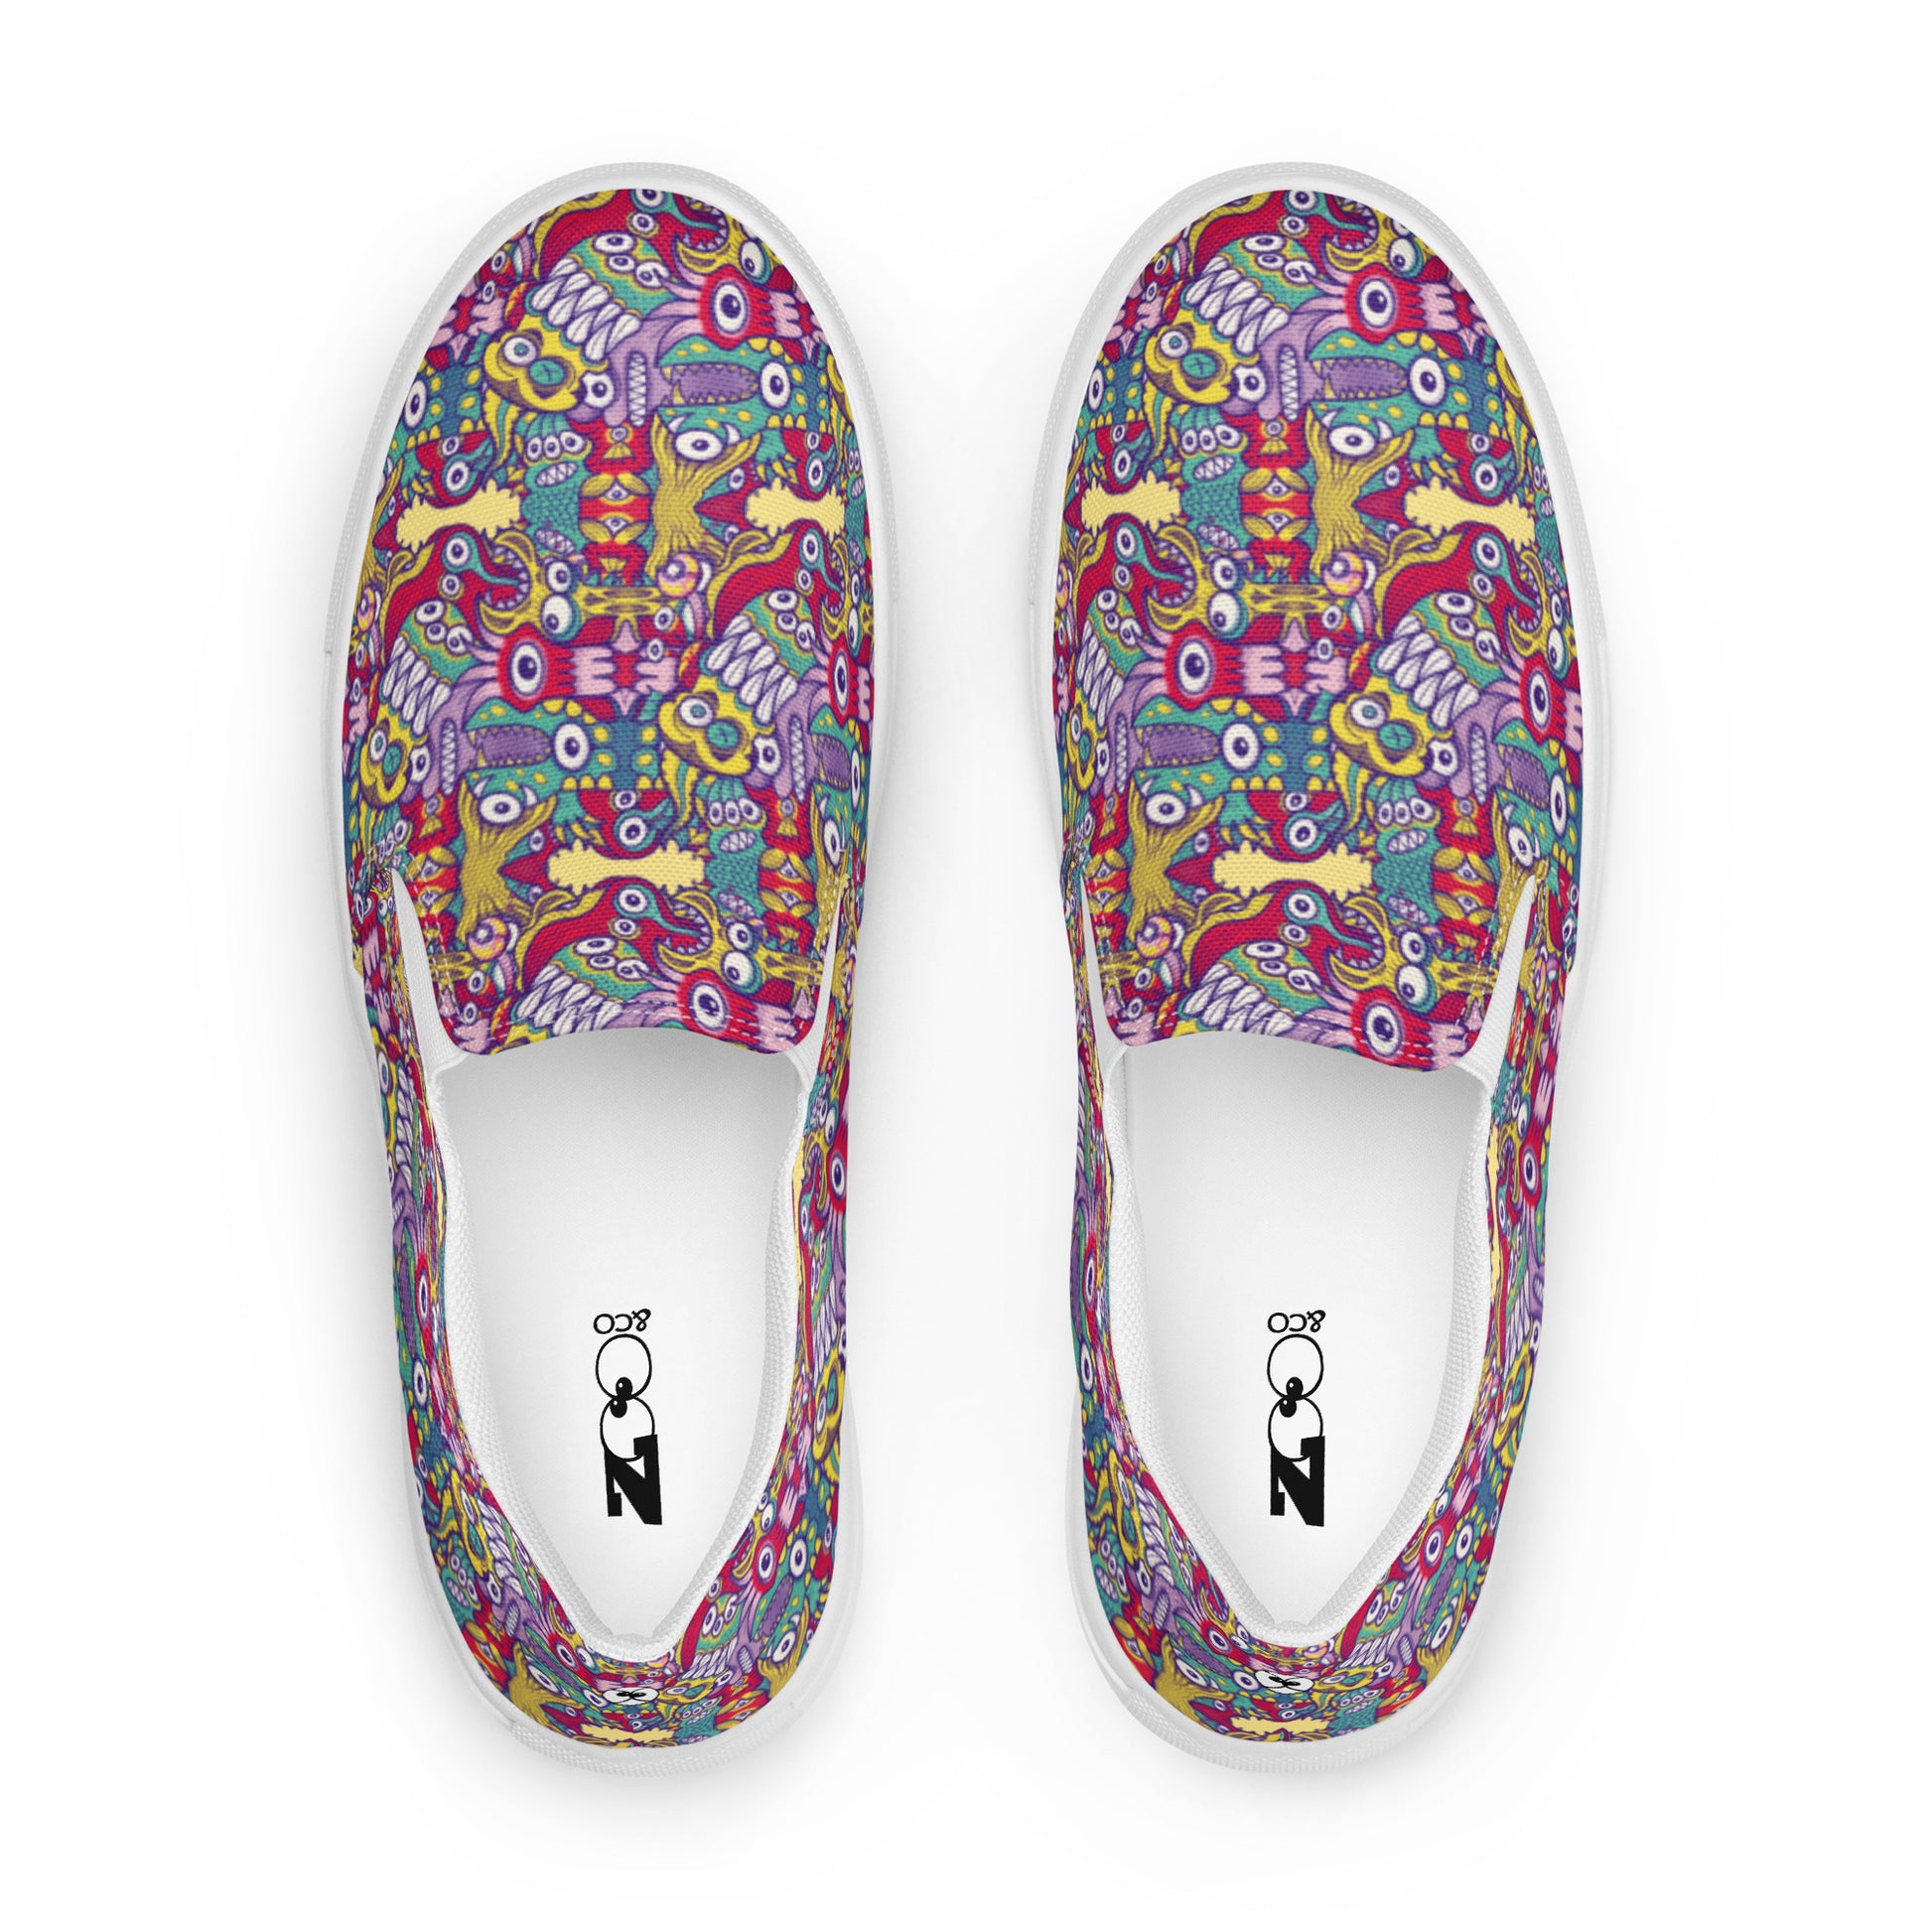 Exquisite corpse doodles in a pattern design Men’s slip-on canvas shoes. Top view